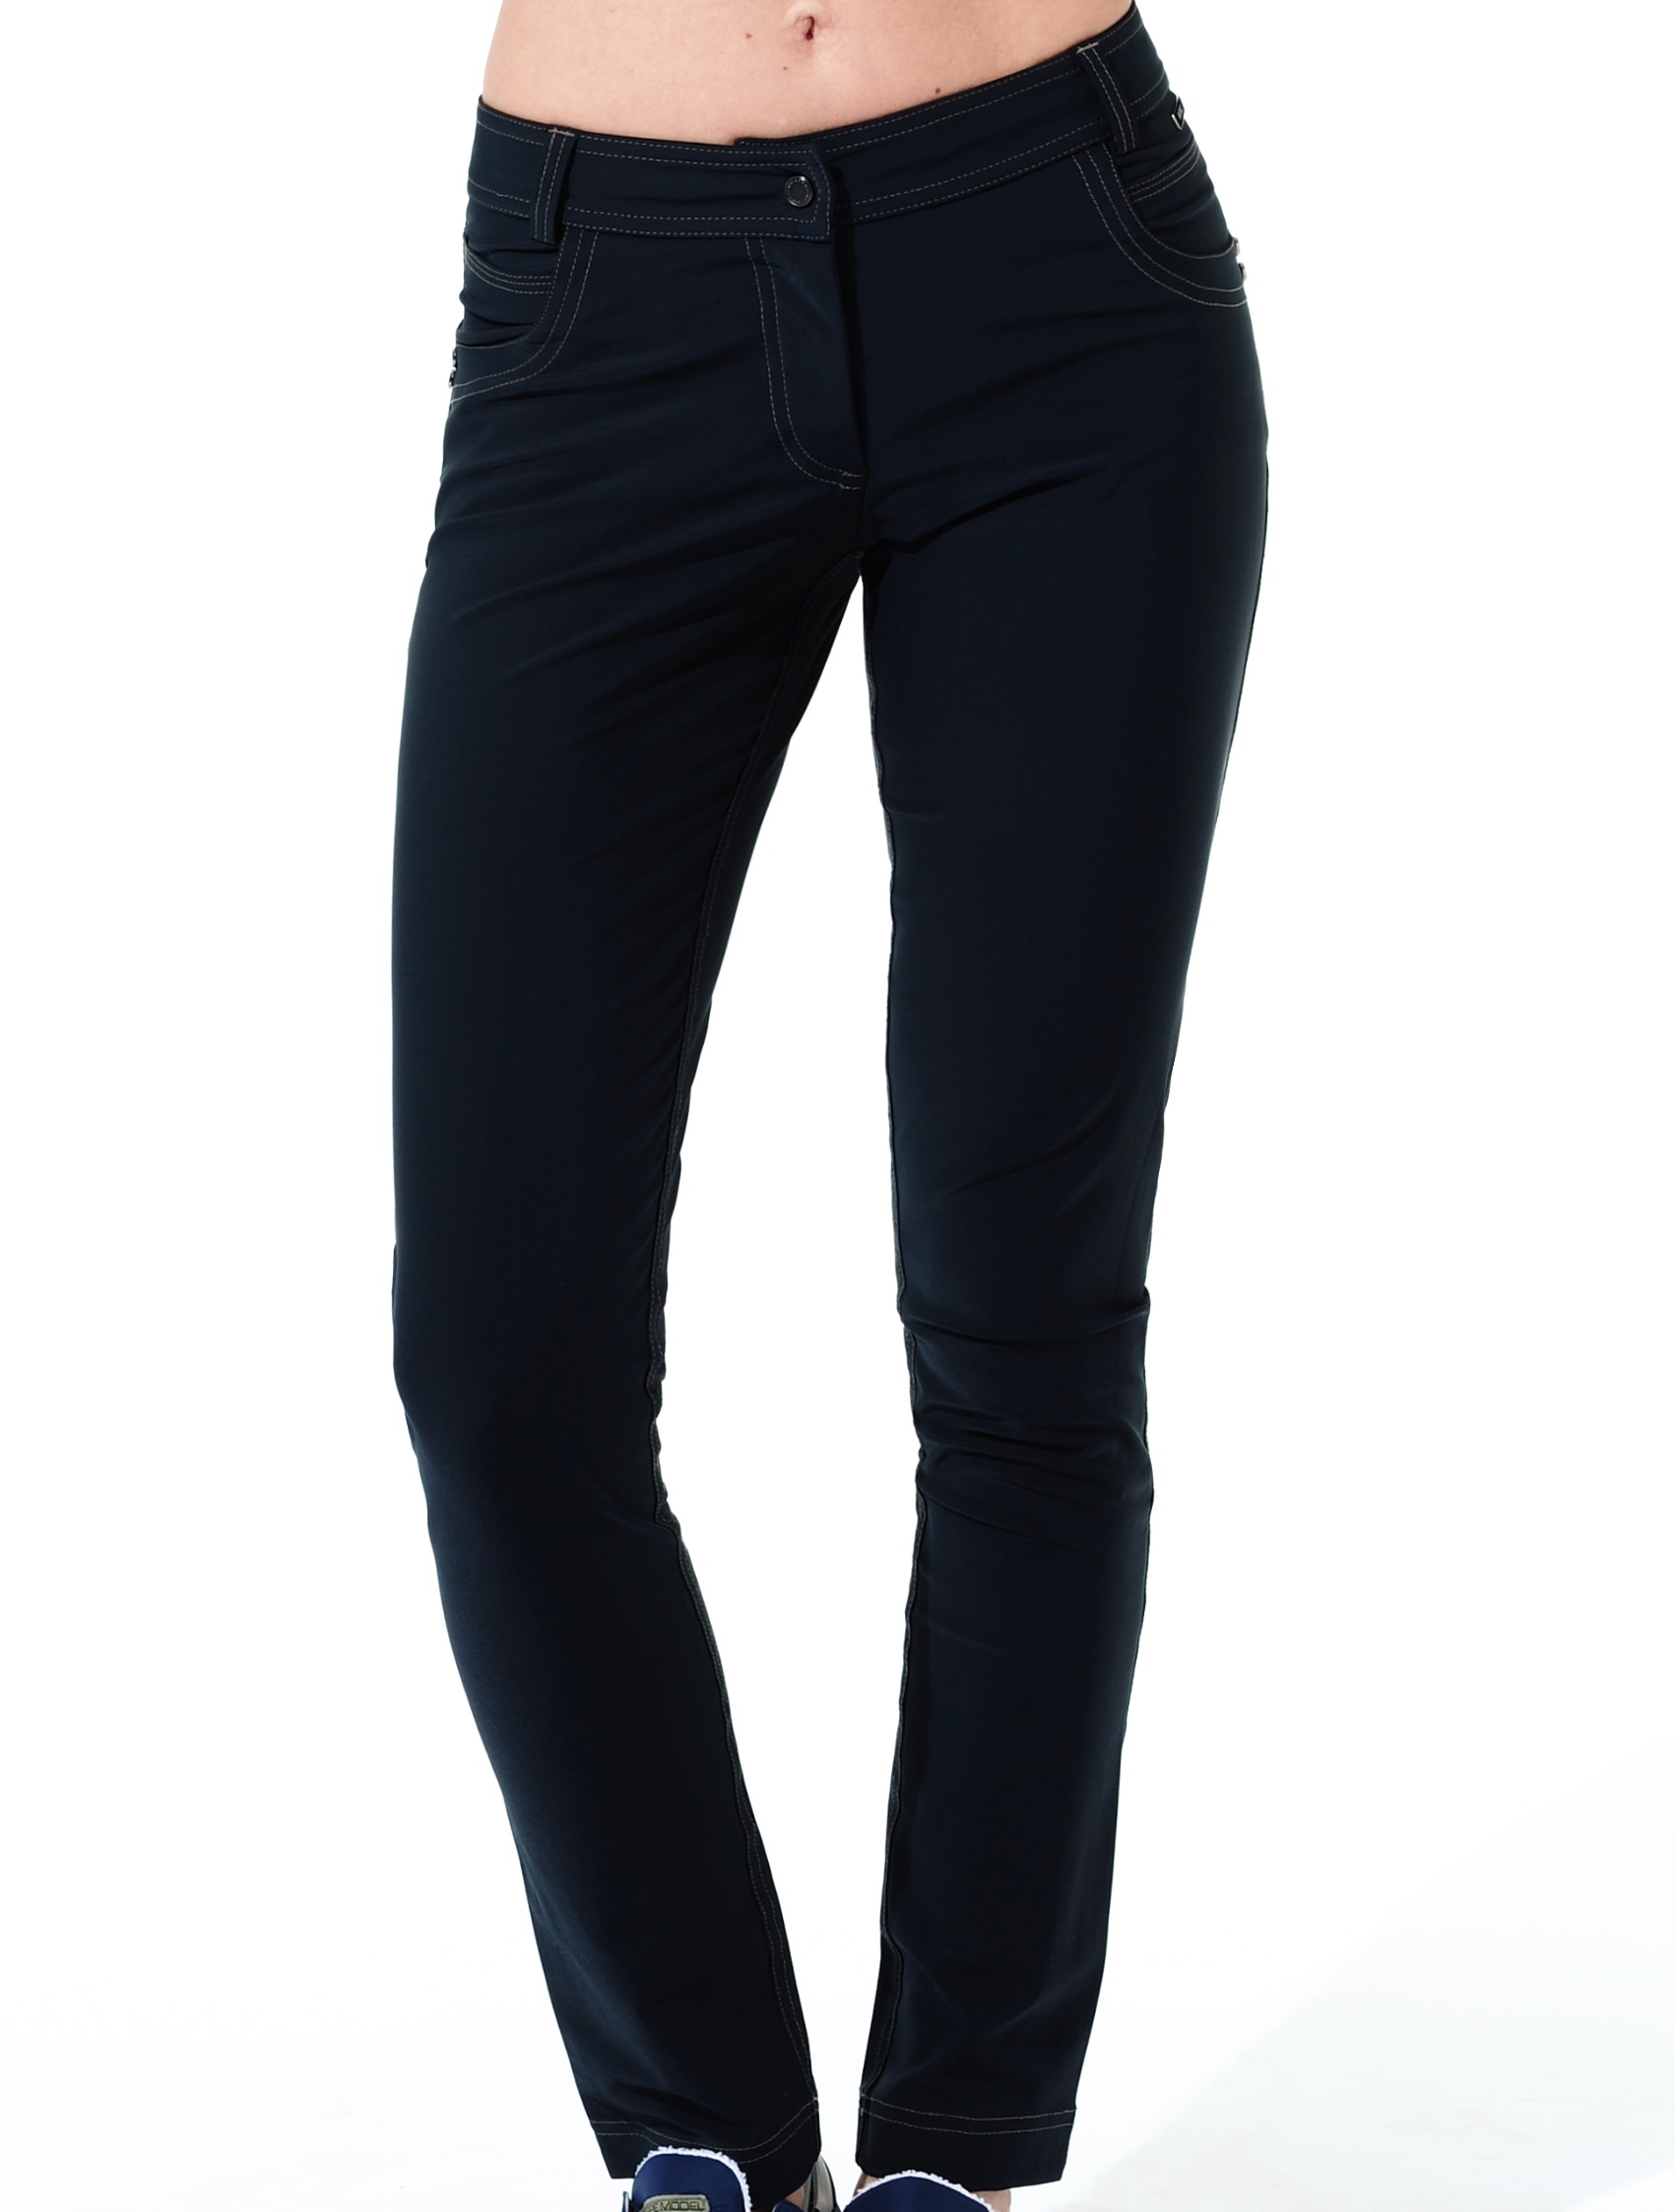 4way stretch ankle pants night blue 